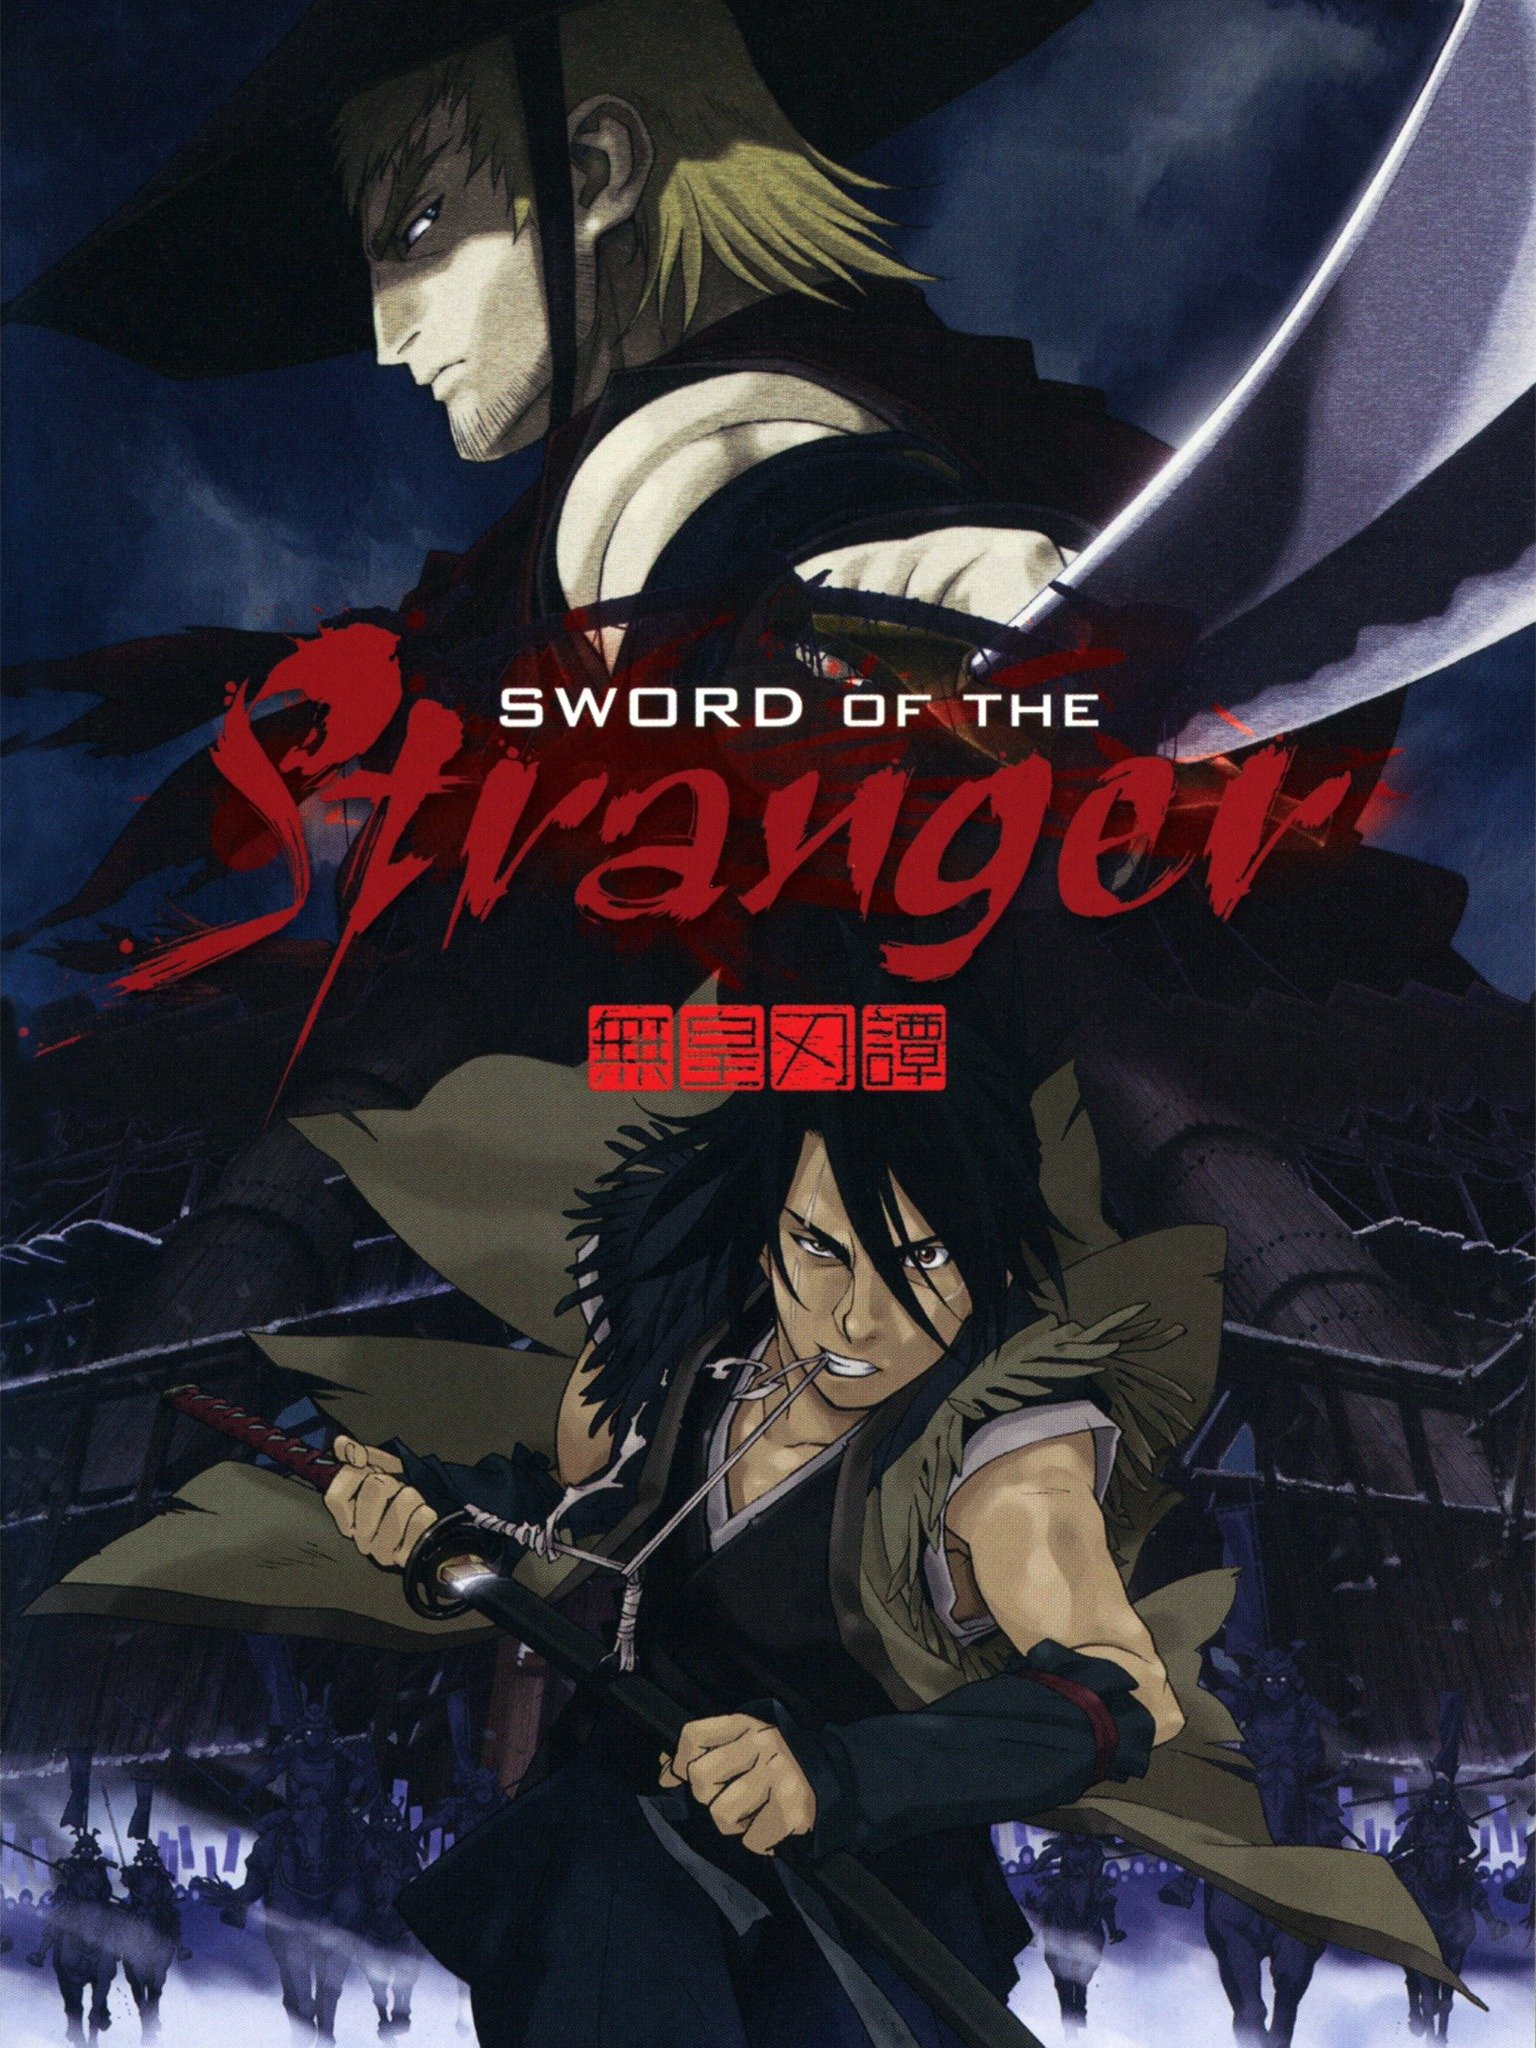 Anime picture sword of the stranger 2000x1488 239366 es